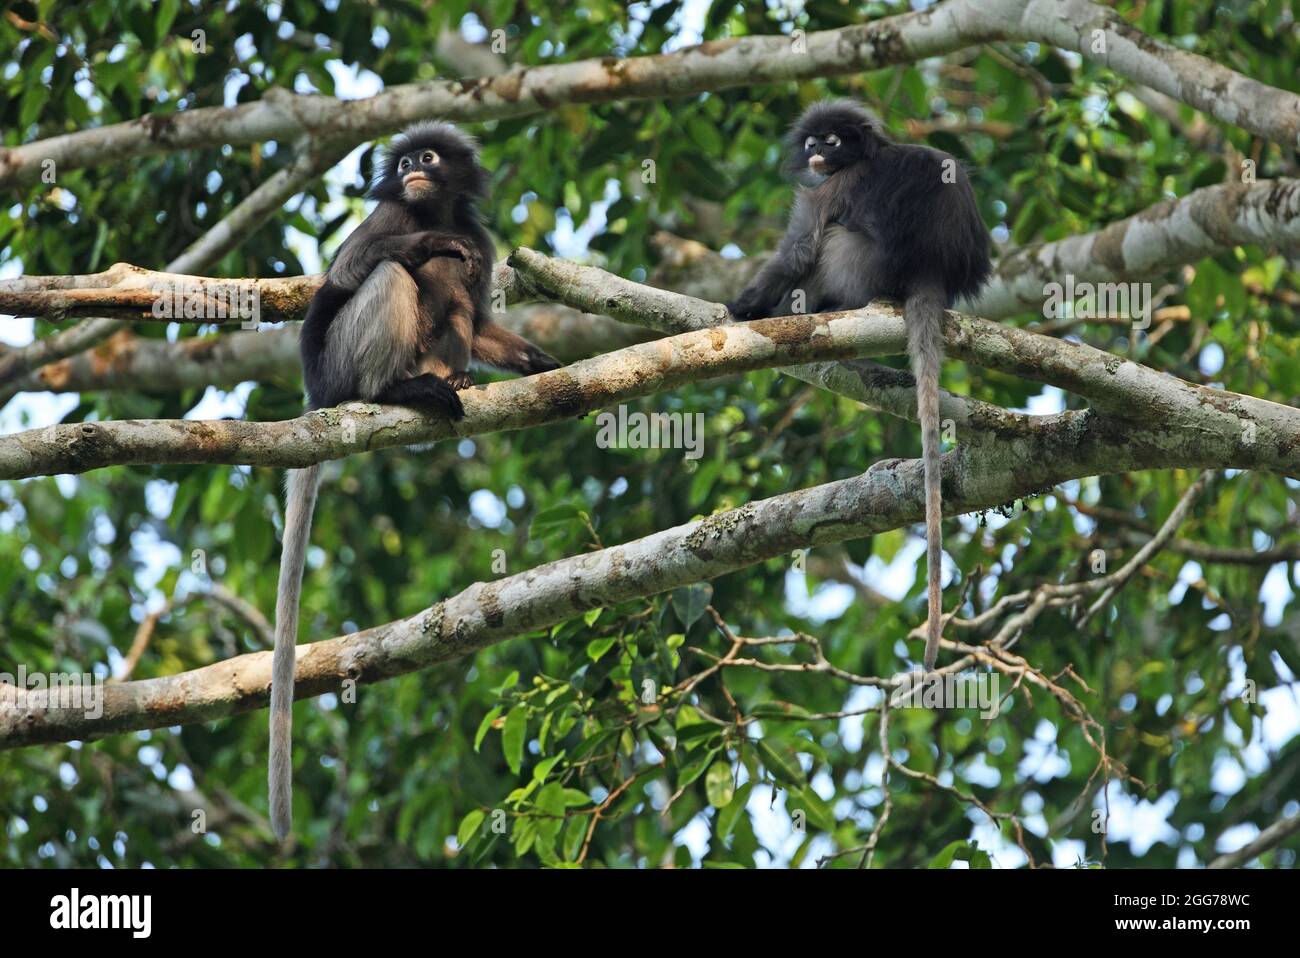 Dusky Langur (Trachypithecus obscurus) adult female and juvenile sitting in tree. Kaeng Krachan NP, Thailand         January Stock Photo